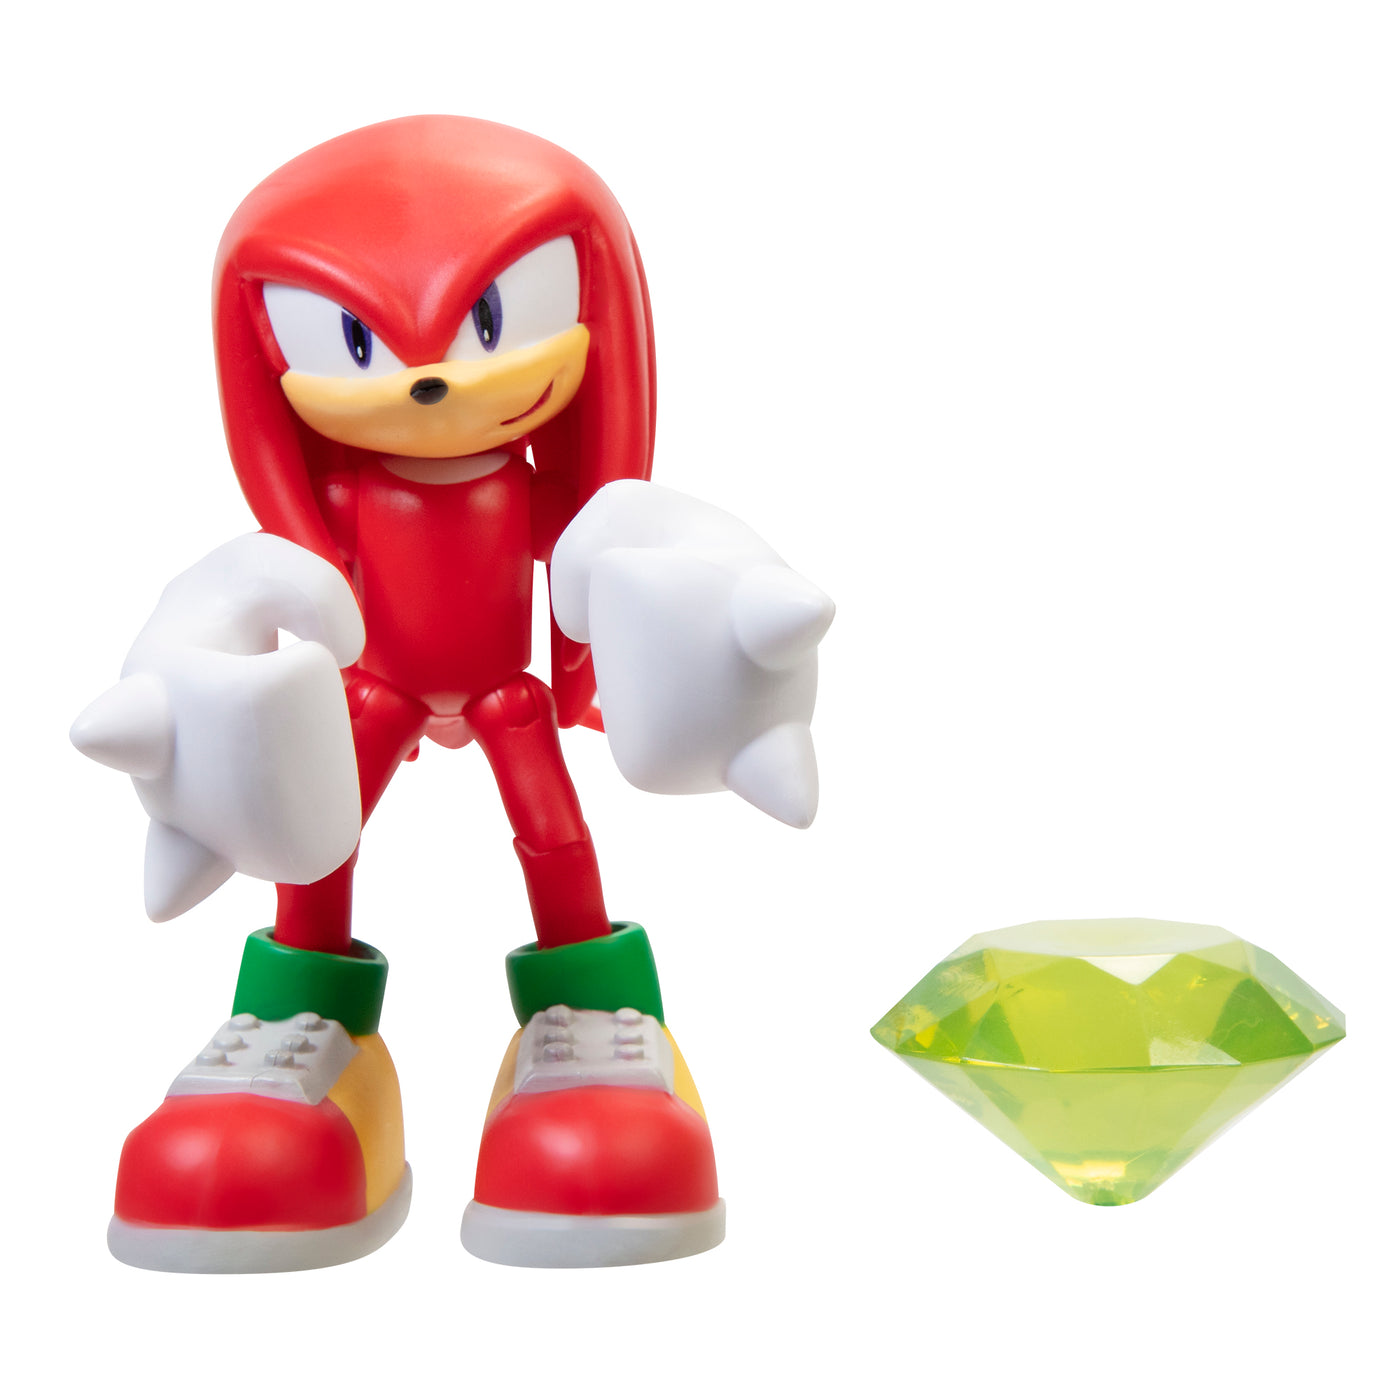 Sonic 4 Inch Modern Knuckles with  Green Chaos Emerald